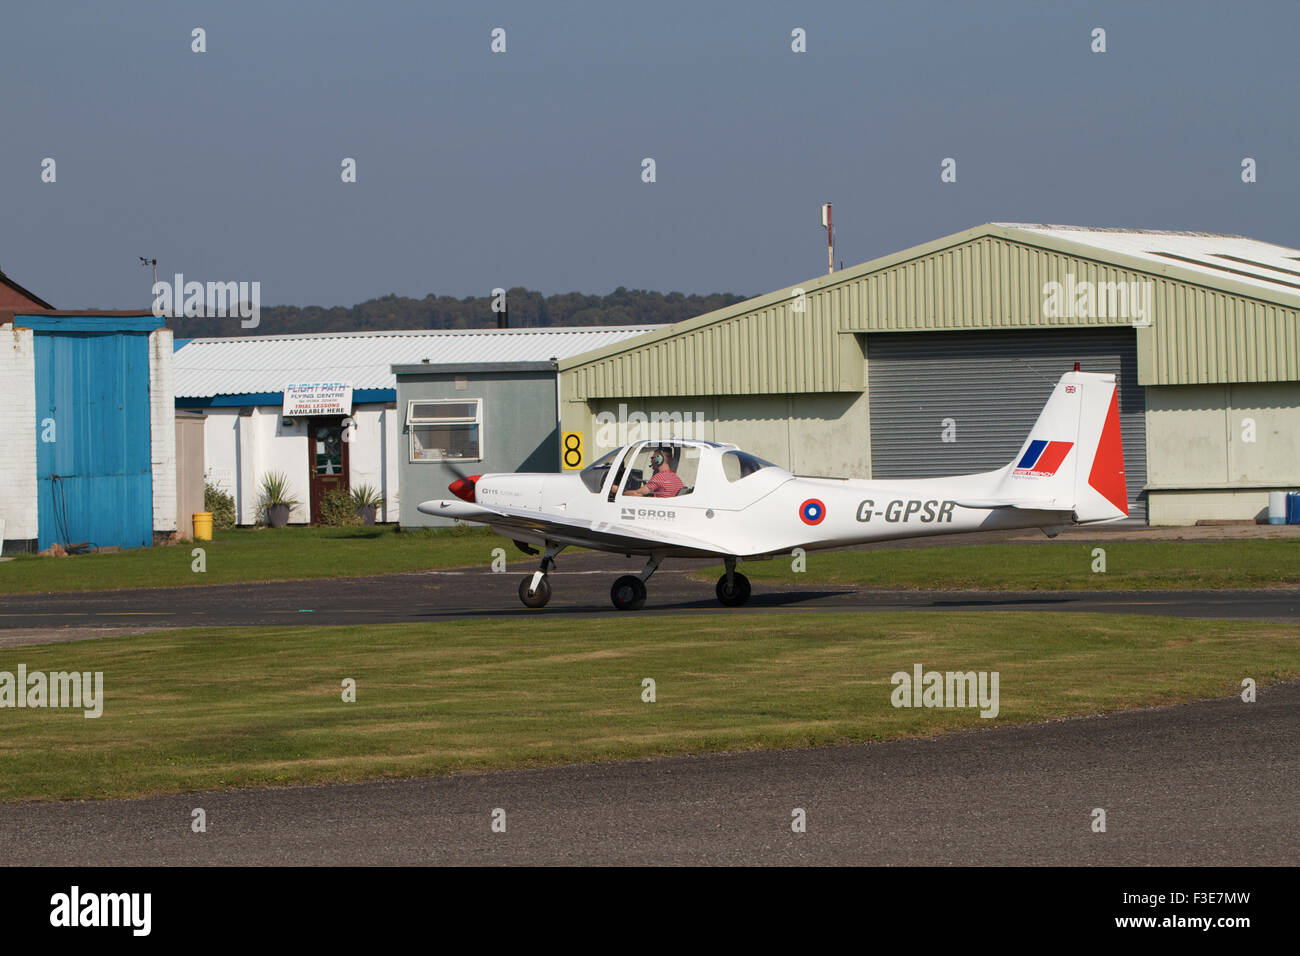 Single engined light aircraft taxiing near out buildings at Wolverhampton Airport. UK Stock Photo